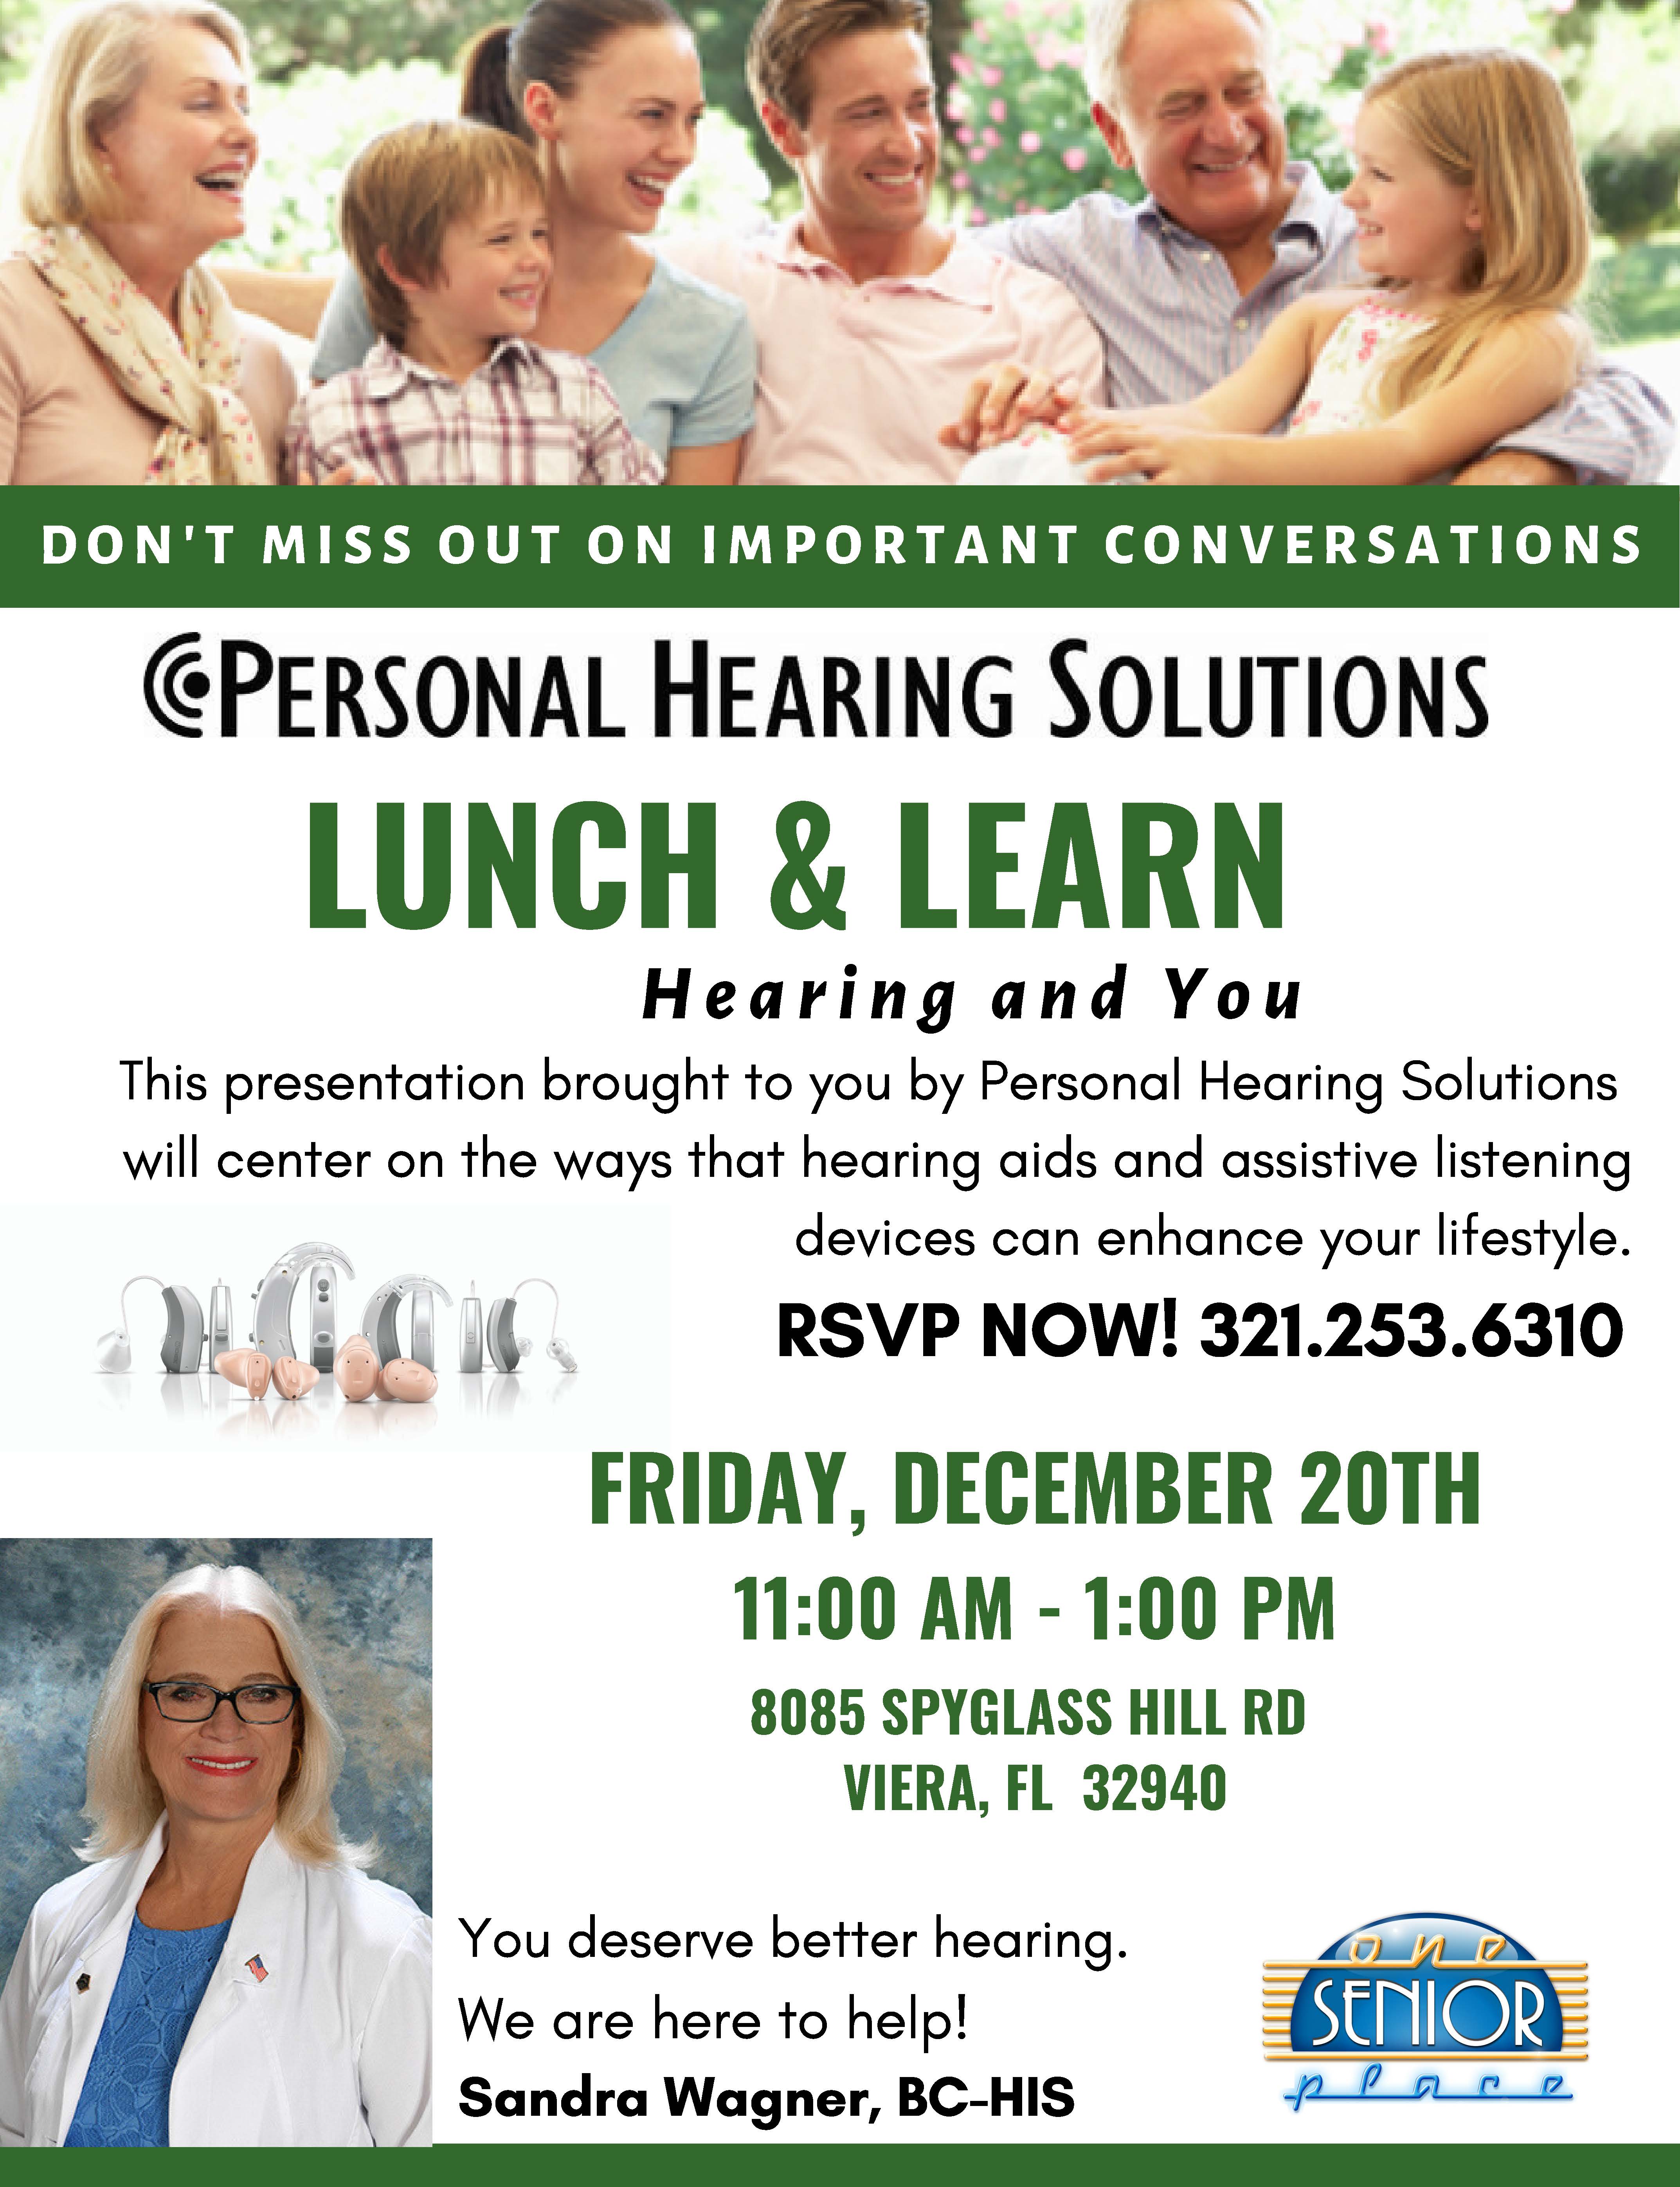 Can You Hear Me Now? Lunch and Learn Seminar presented by Personal Hearing Solutions